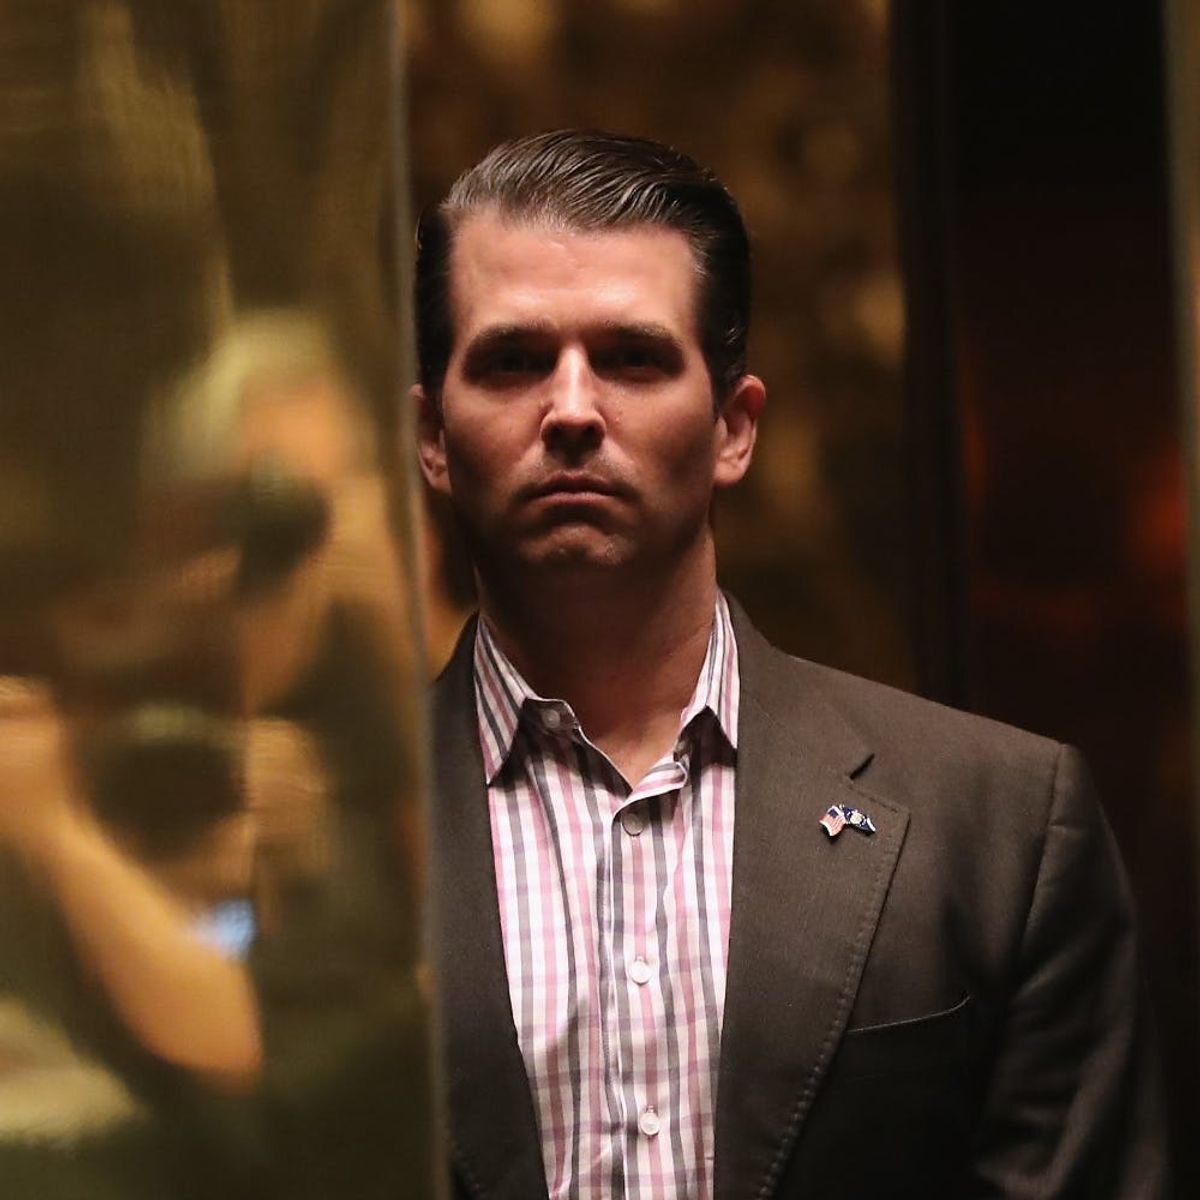 Here’s What We Know About the Donald Trump Jr. Email Scandal